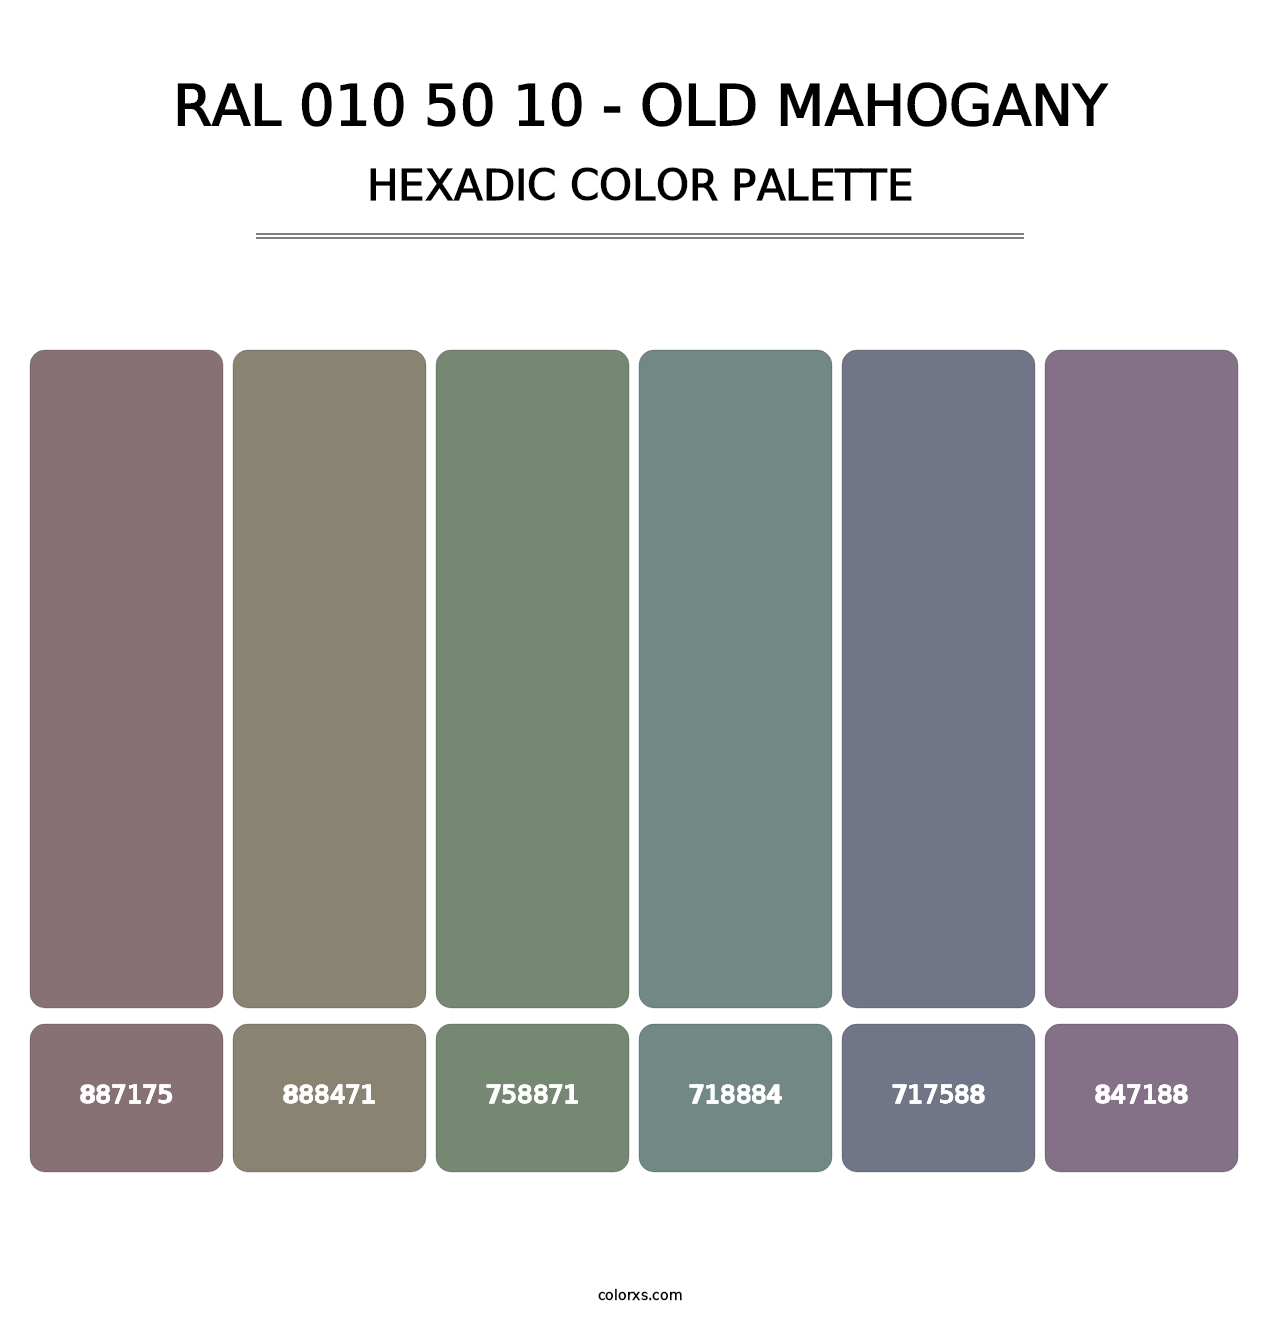 RAL 010 50 10 - Old Mahogany - Hexadic Color Palette